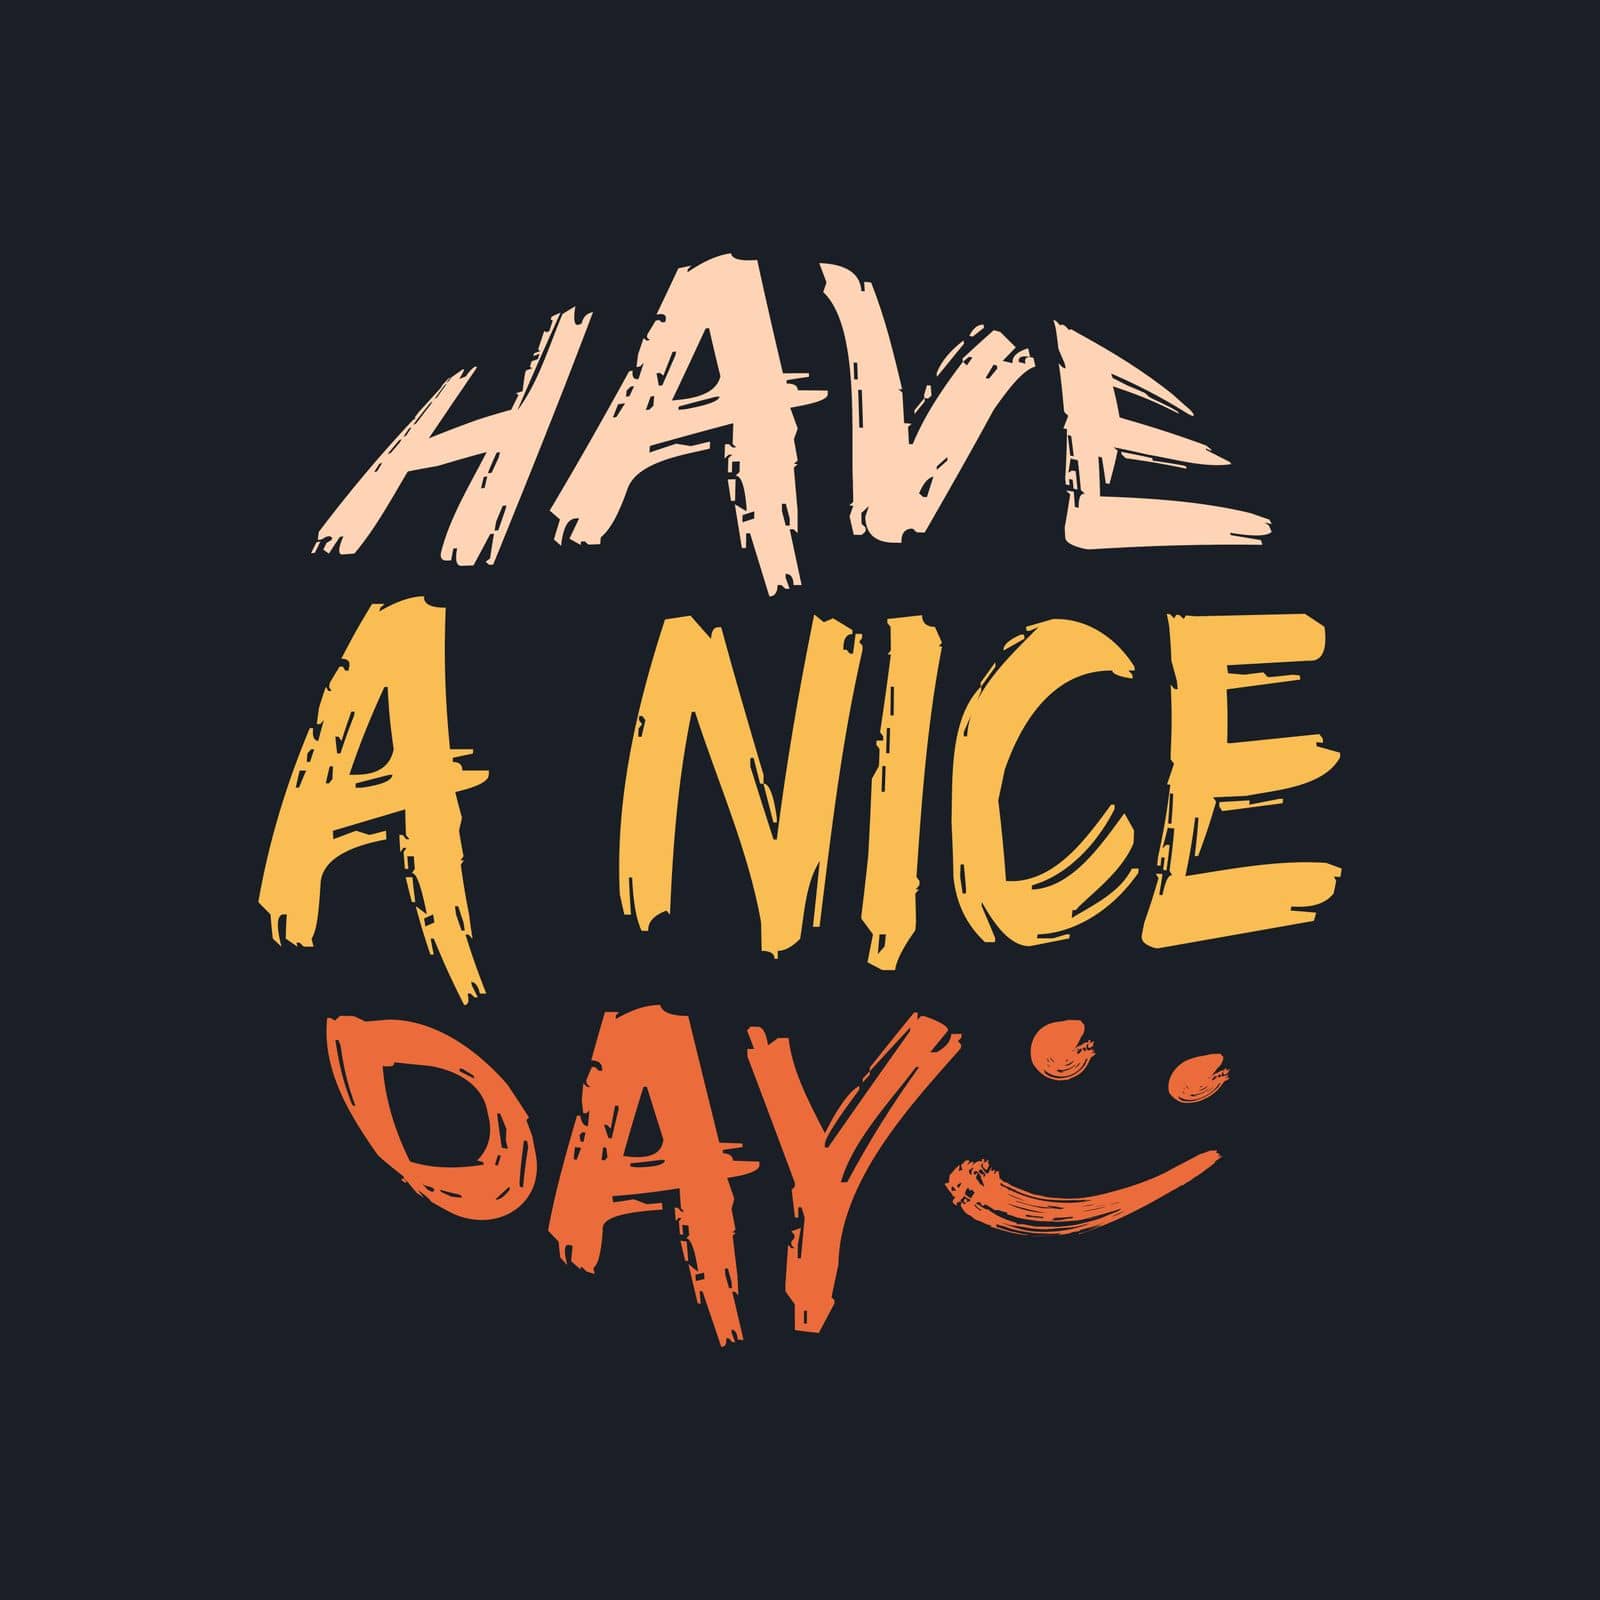 HAVE A NICE DAY, lettering typography in badge style design artwork. Editable, resizable, EPS 10, vector illustration.